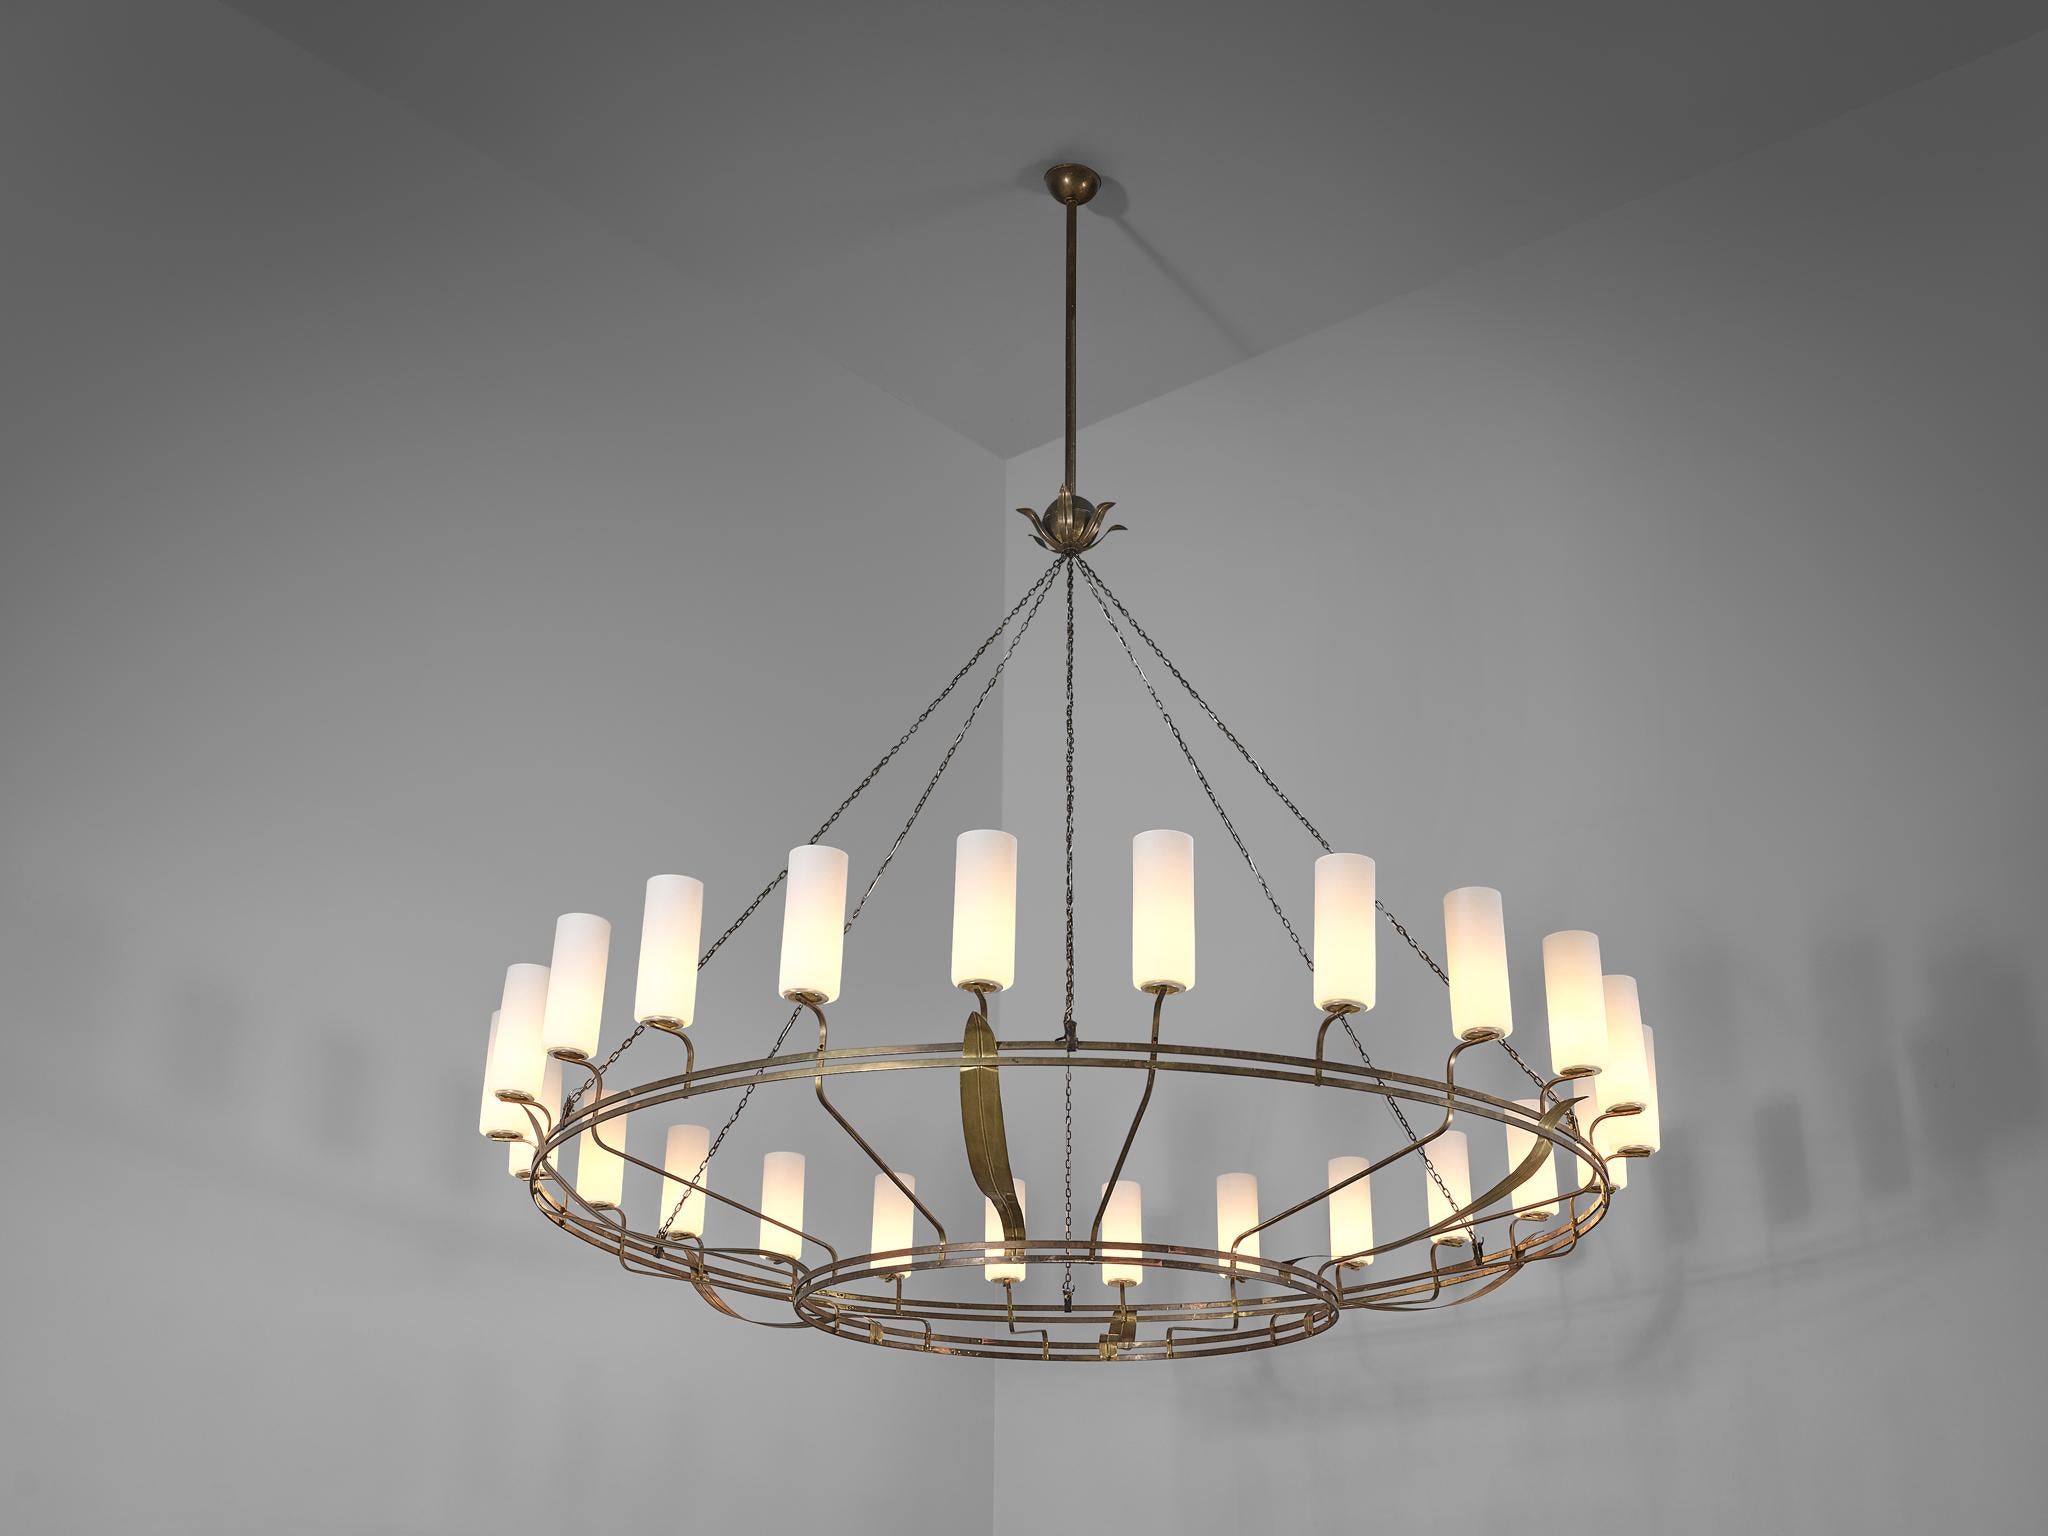 Large chandelier, patinated brass, glass, Europe, 1940s

This highly elegant chandelier is very impressive in its size and execution. Made in Europe in the 1940s, this chandelier shows traits and detailing of the late Art Deco period. The structure